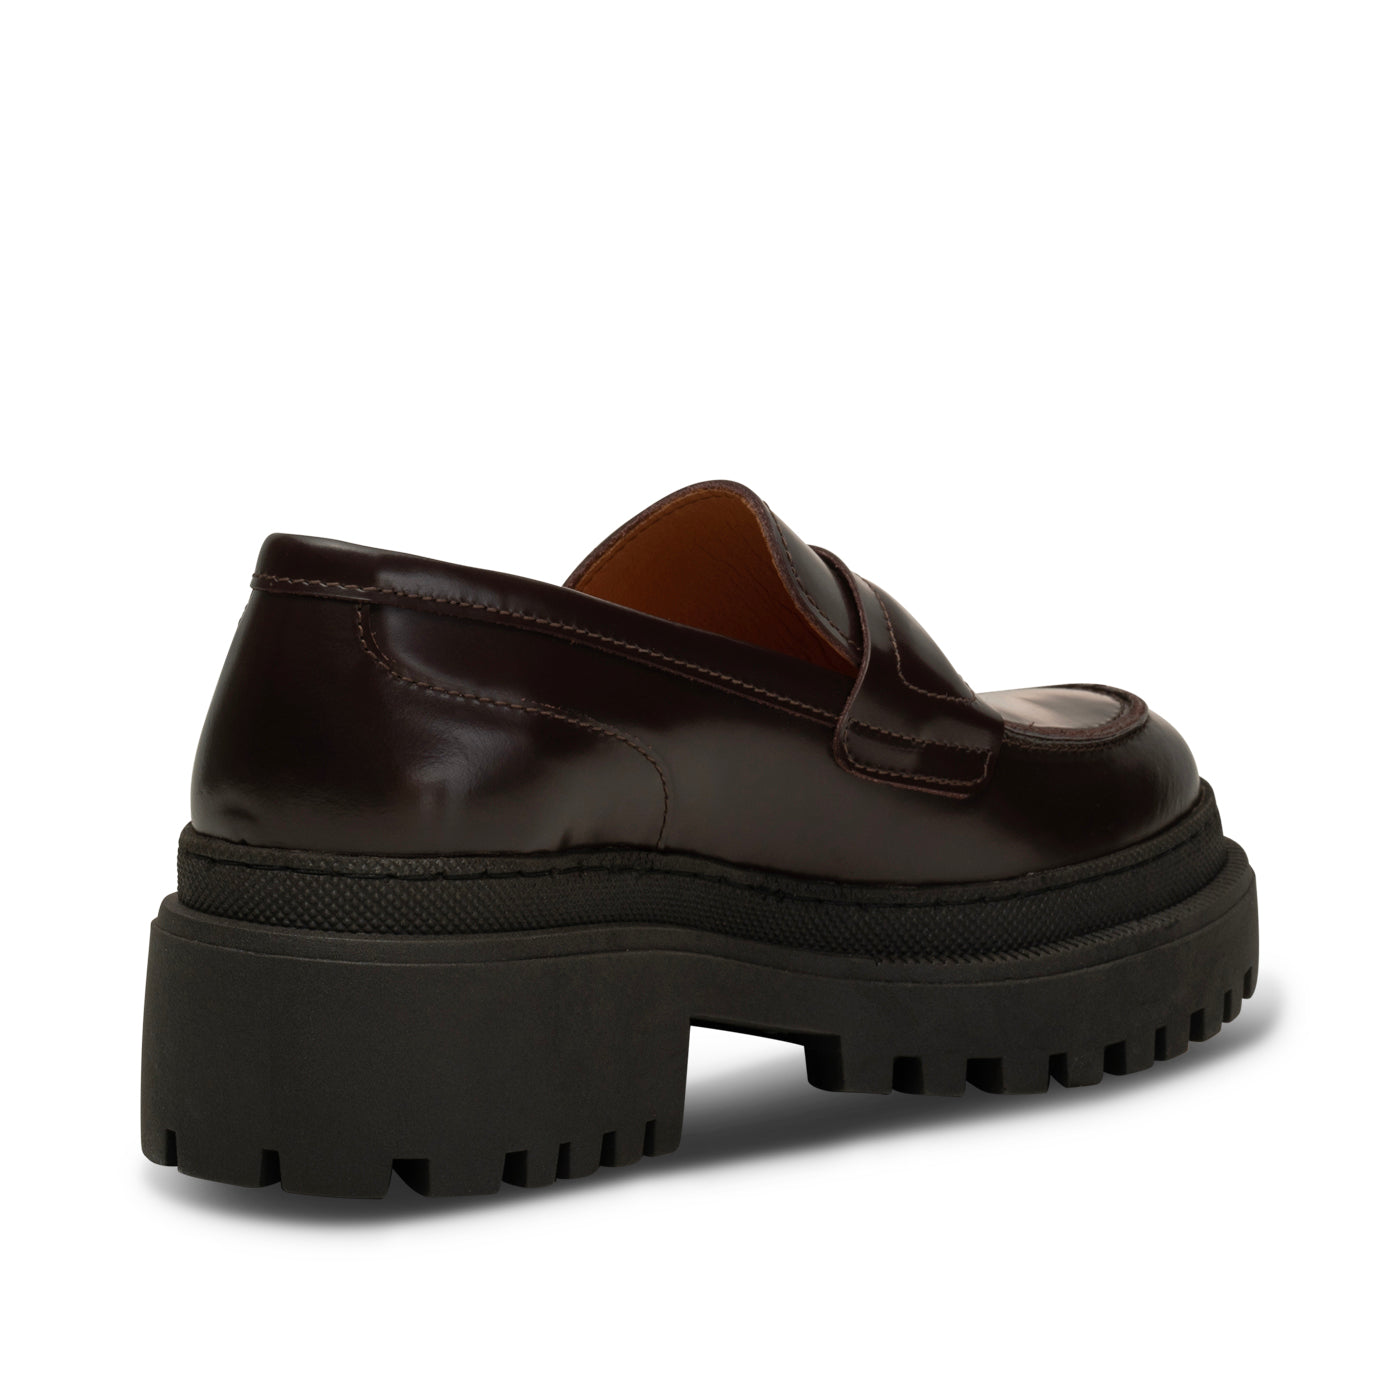 Shoe The Bear - Iona Loafer Leather - Bordeaux High Shine